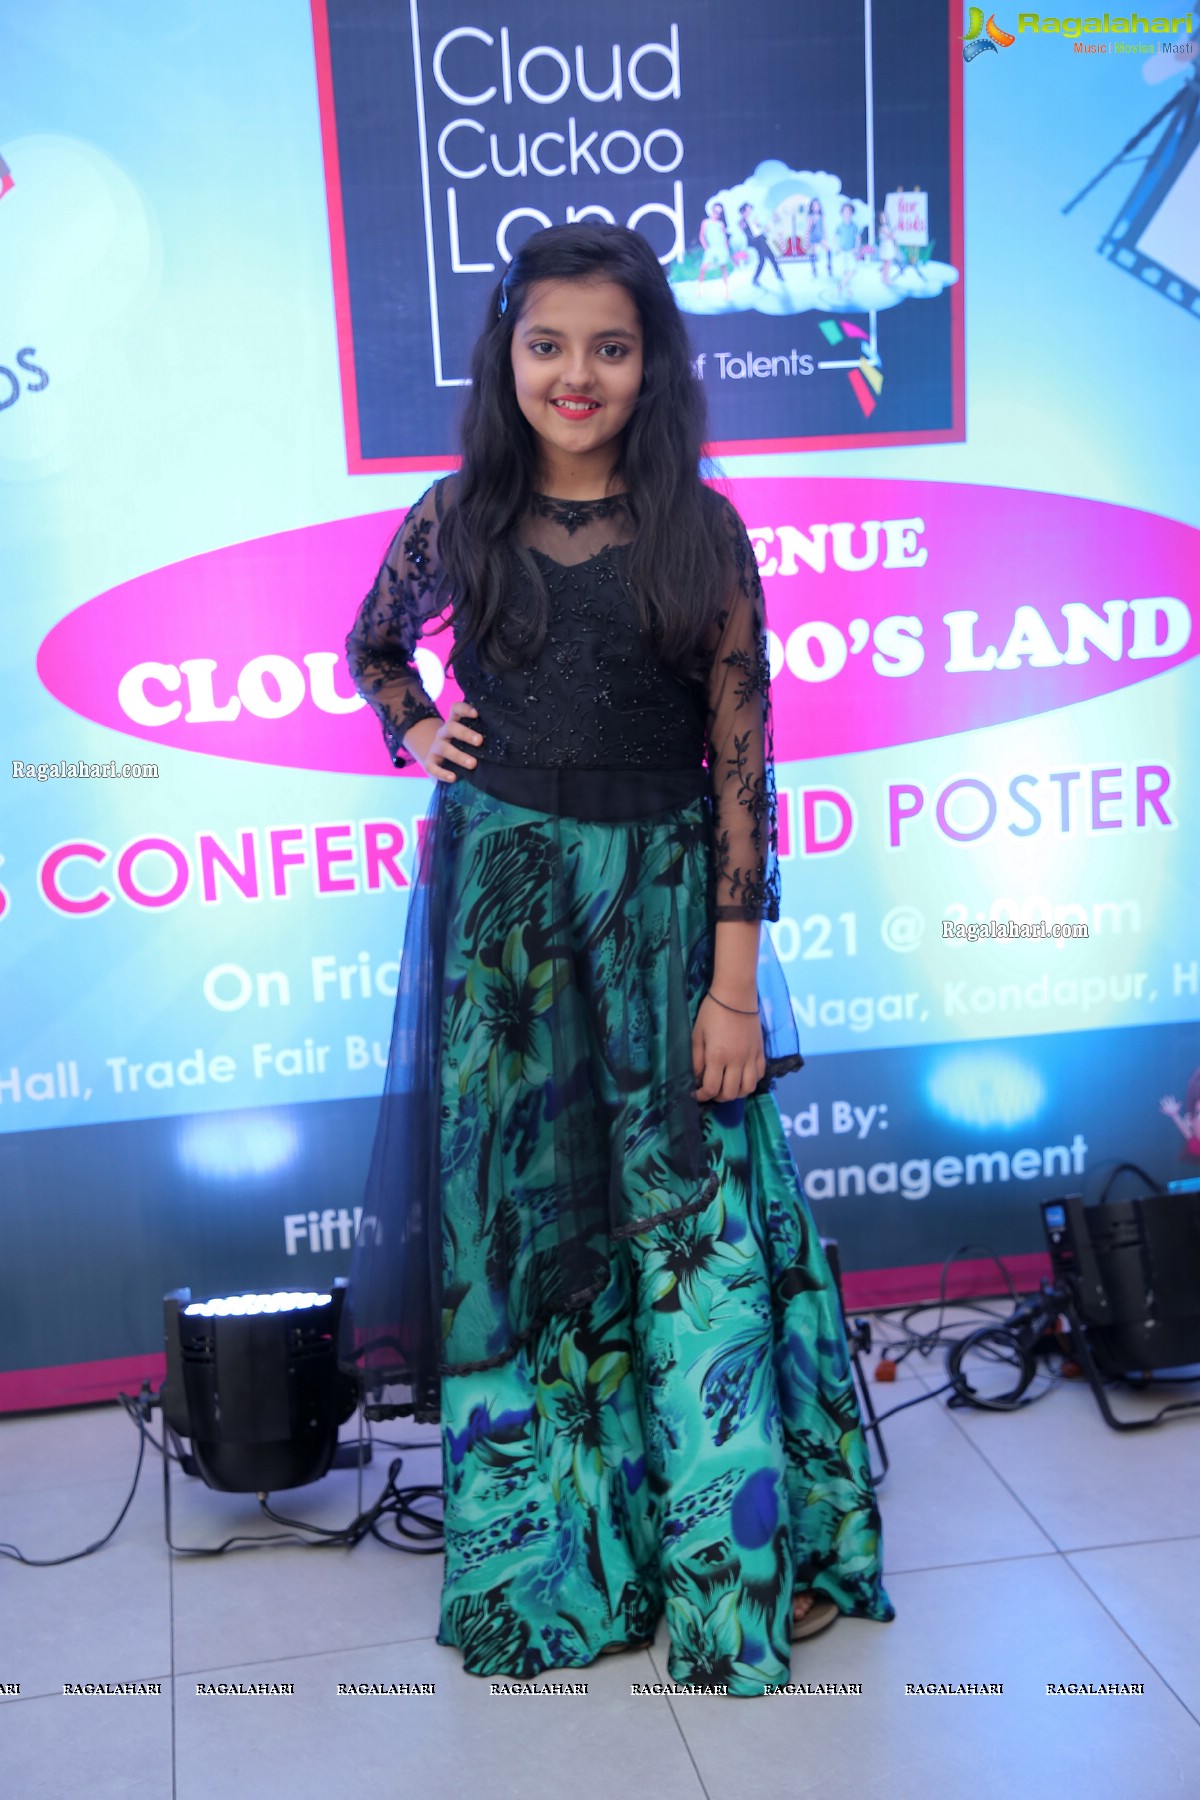 Cloud Cuckoo's Land Poster Launch and Kids Fashion Show at HITEX